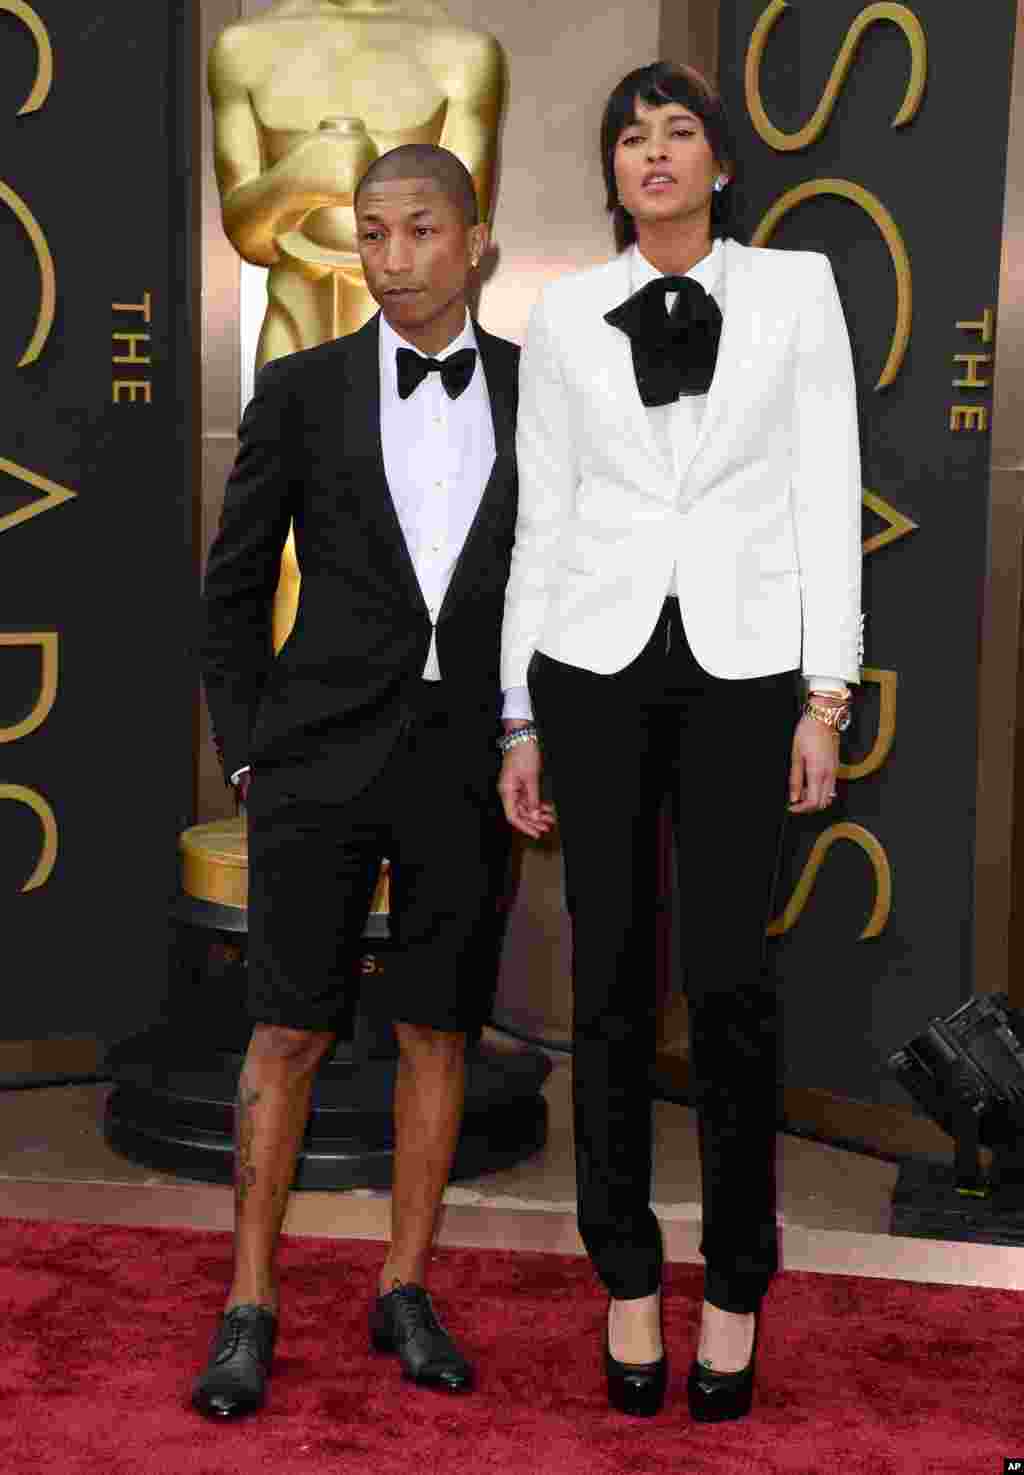 Pharrell Williams, left, and Helen Lasichanh arrive at the Oscars on March 2, 2014, at the Dolby Theatre in Los Angeles.